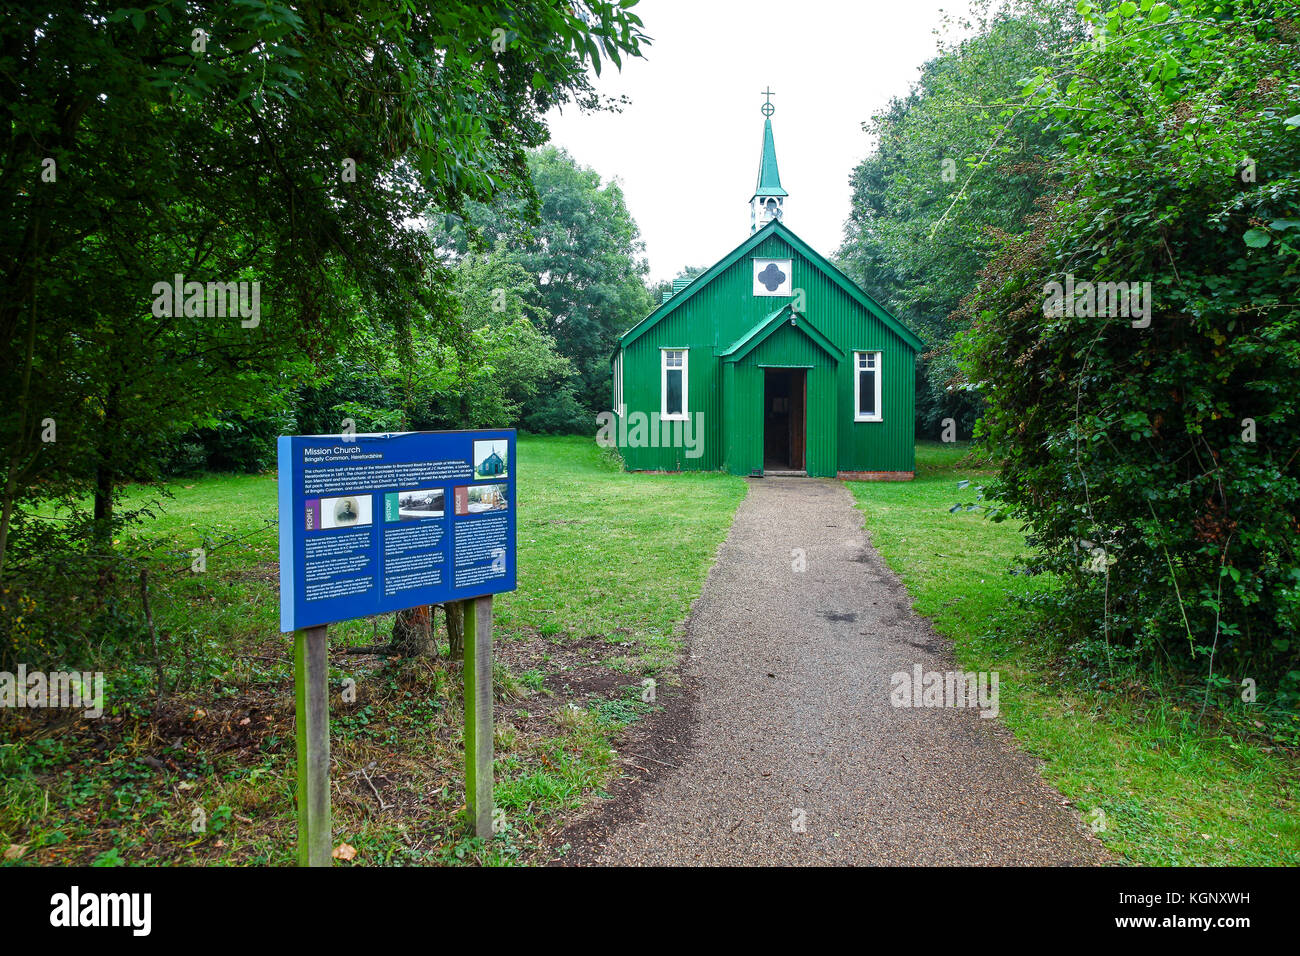 The Mission Church, a 'Tin Church' tin tabernacle relocated from Bringsty Common at the Avoncroft Museum of Buildings, Worcestershire, England, UK Stock Photo